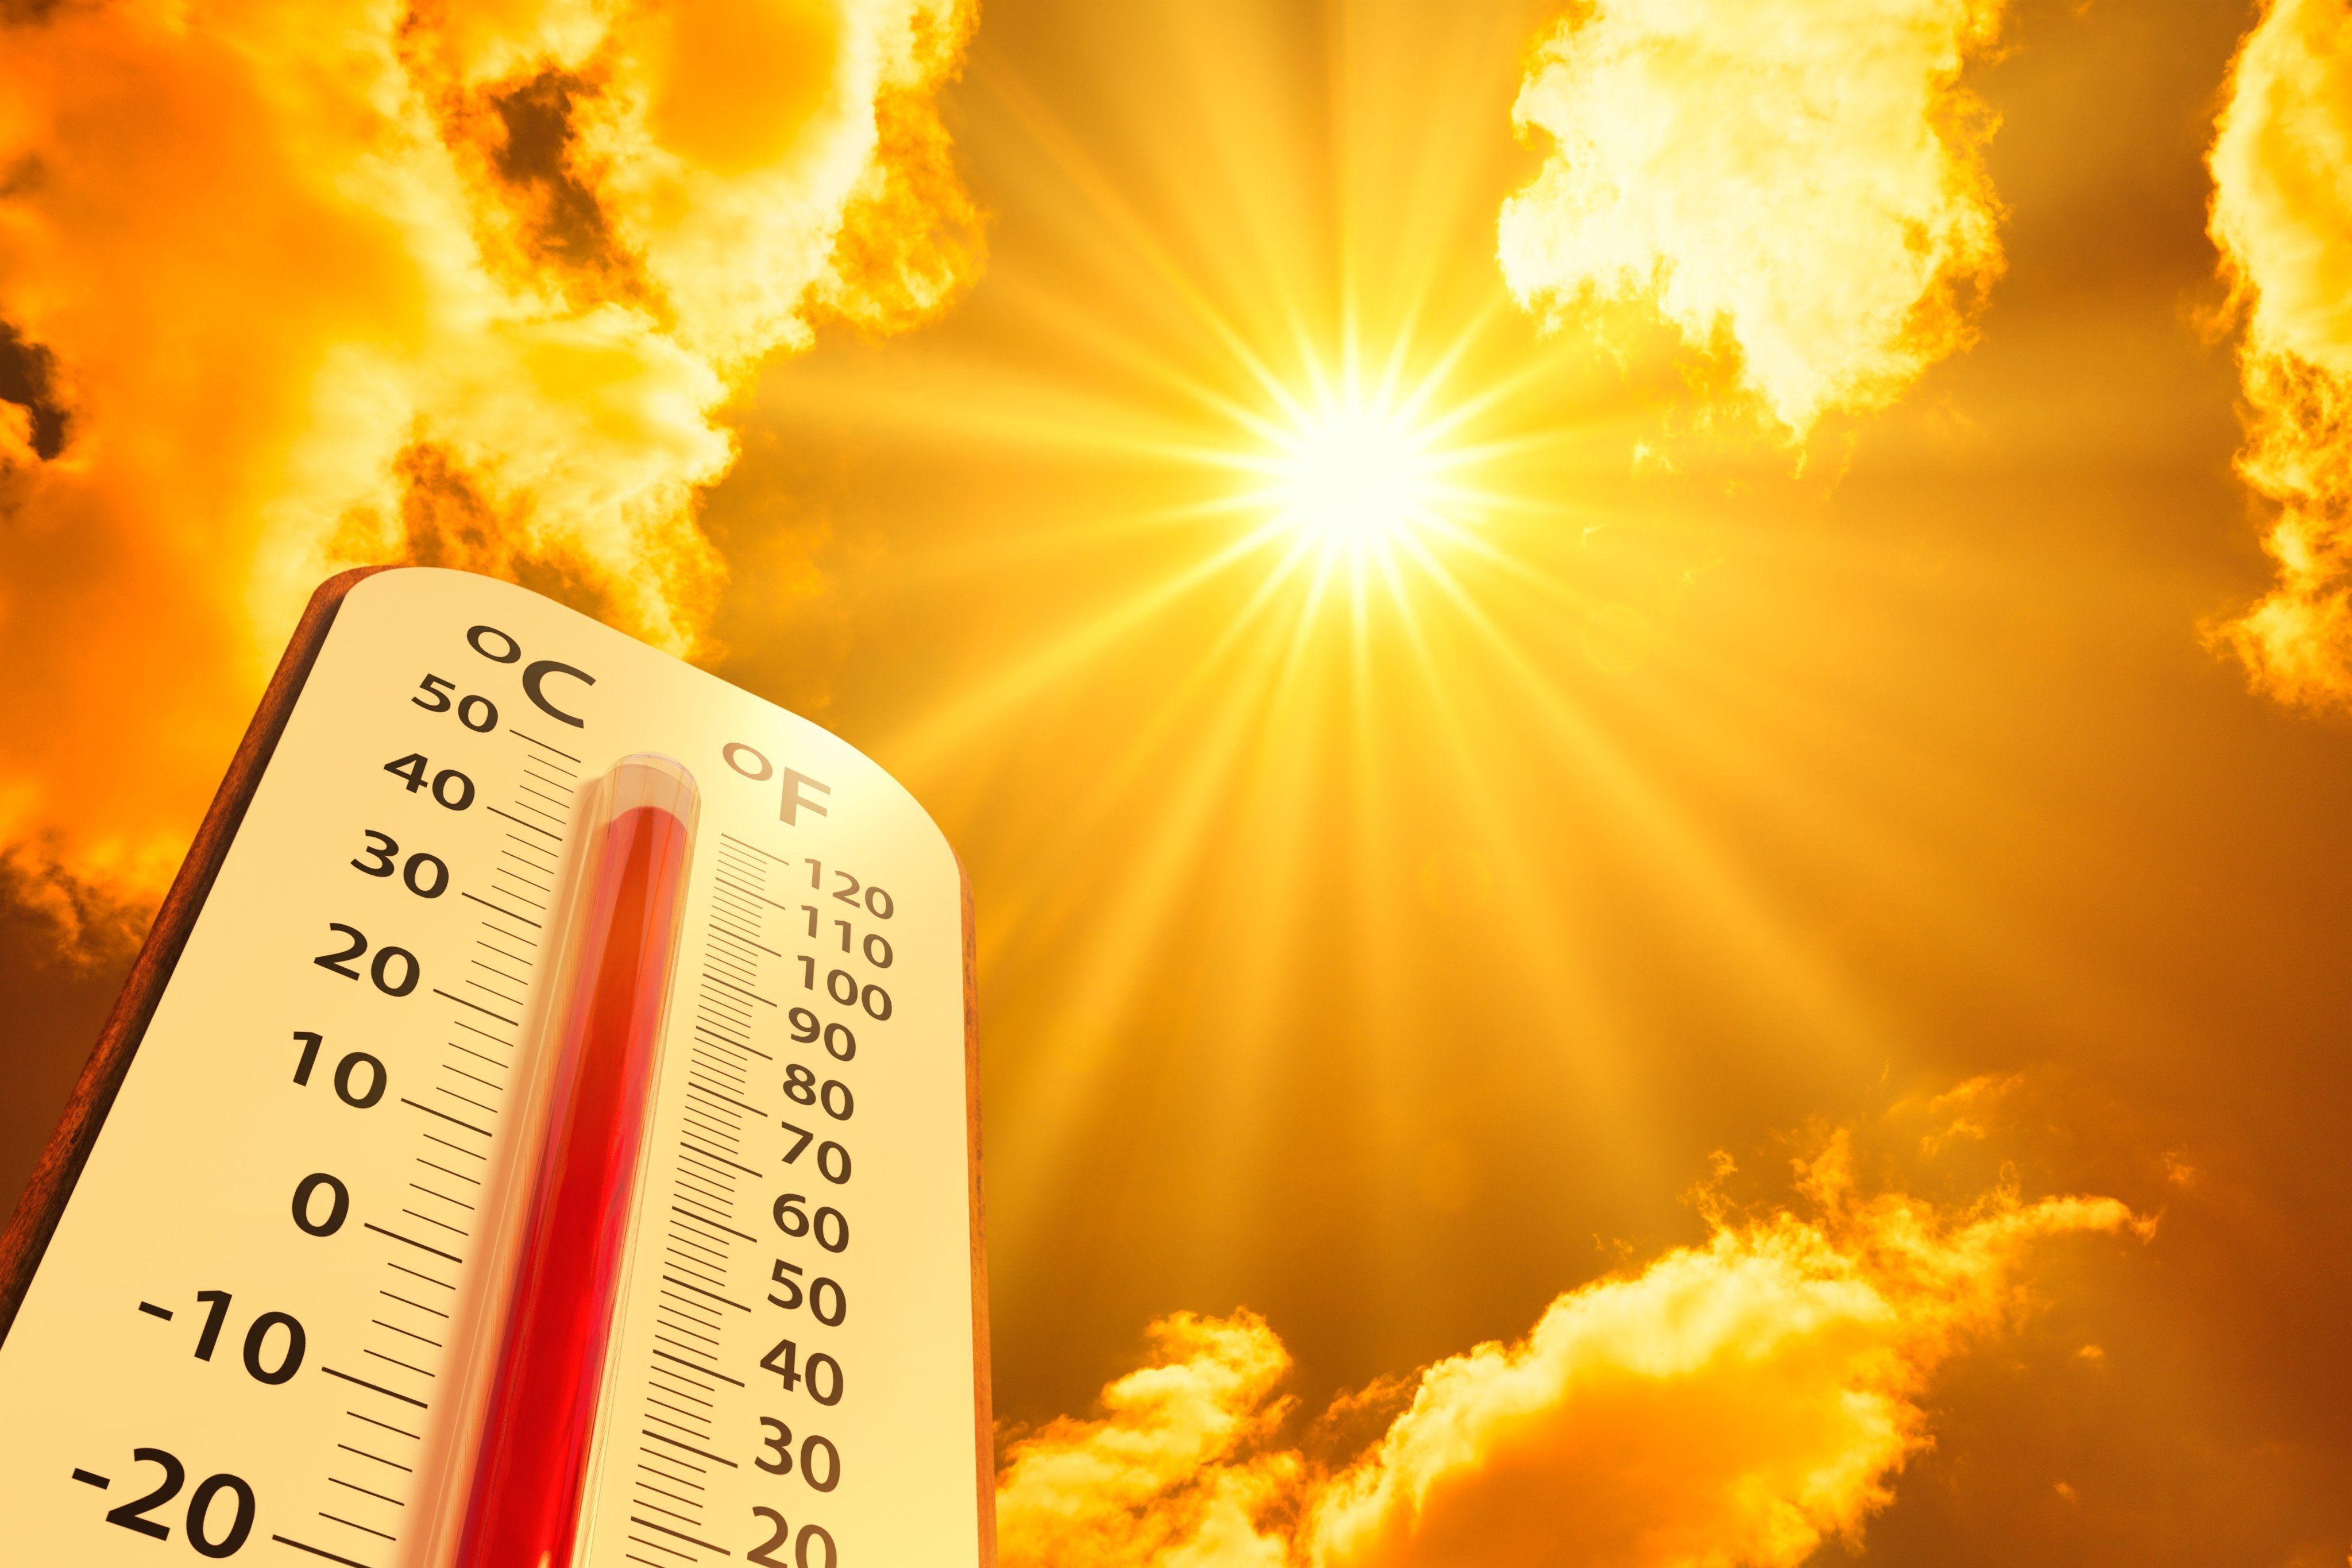 The world recorded its hottest ever day on Sunday, according to European weather monitors. Photo: Shutterstock